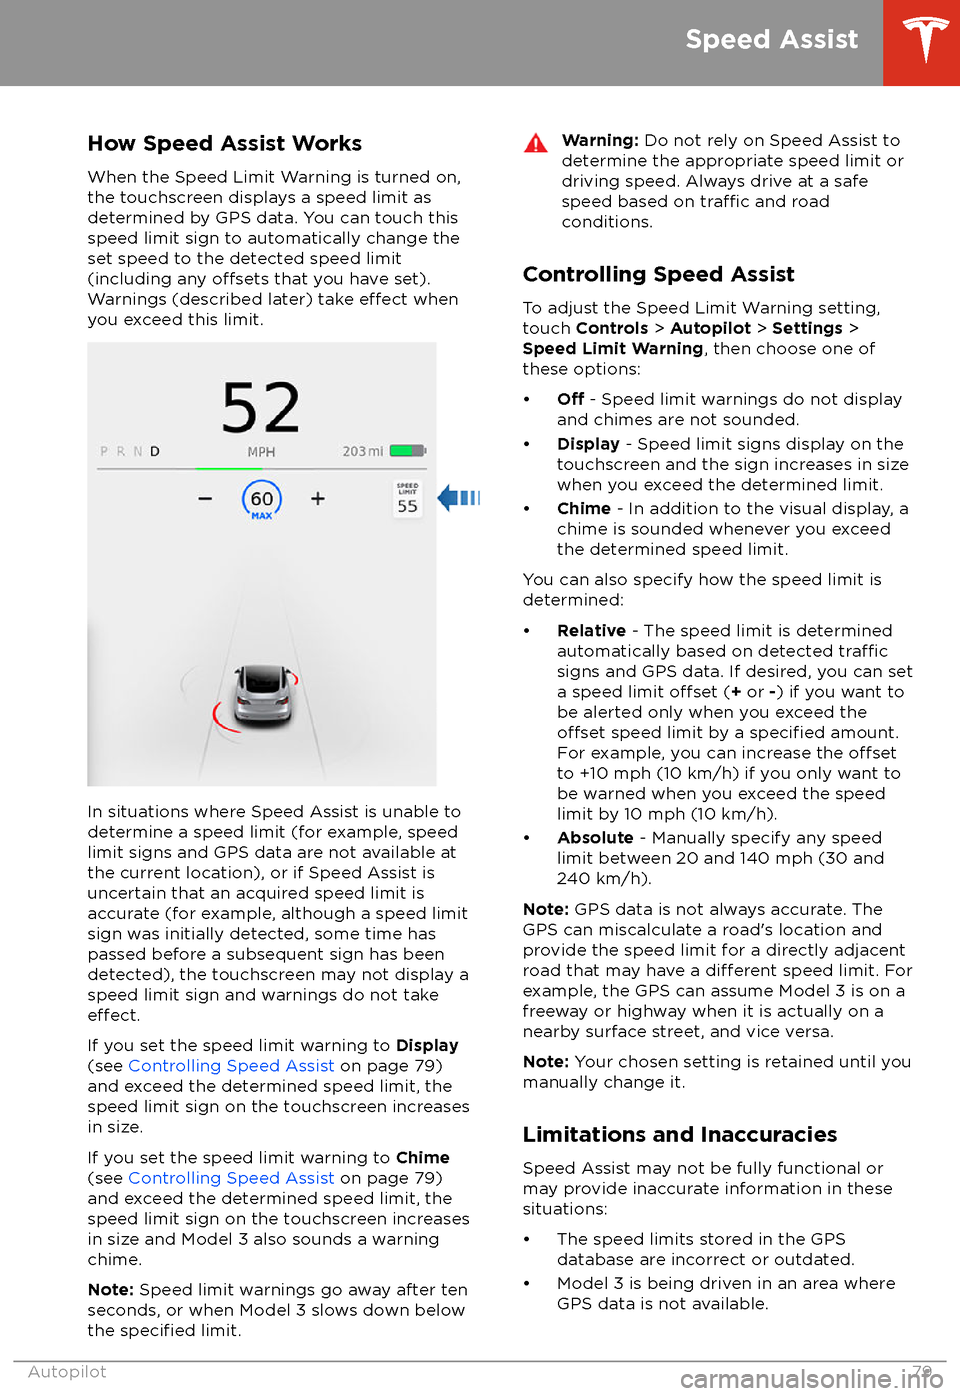 TESLA MODEL 3 2018  Owners Manual How Speed Assist Works
When the Speed Limit Warning is turned on,
the touchscreen displays a speed limit as determined by GPS data. You can touch this
speed limit sign to automatically change the
set 